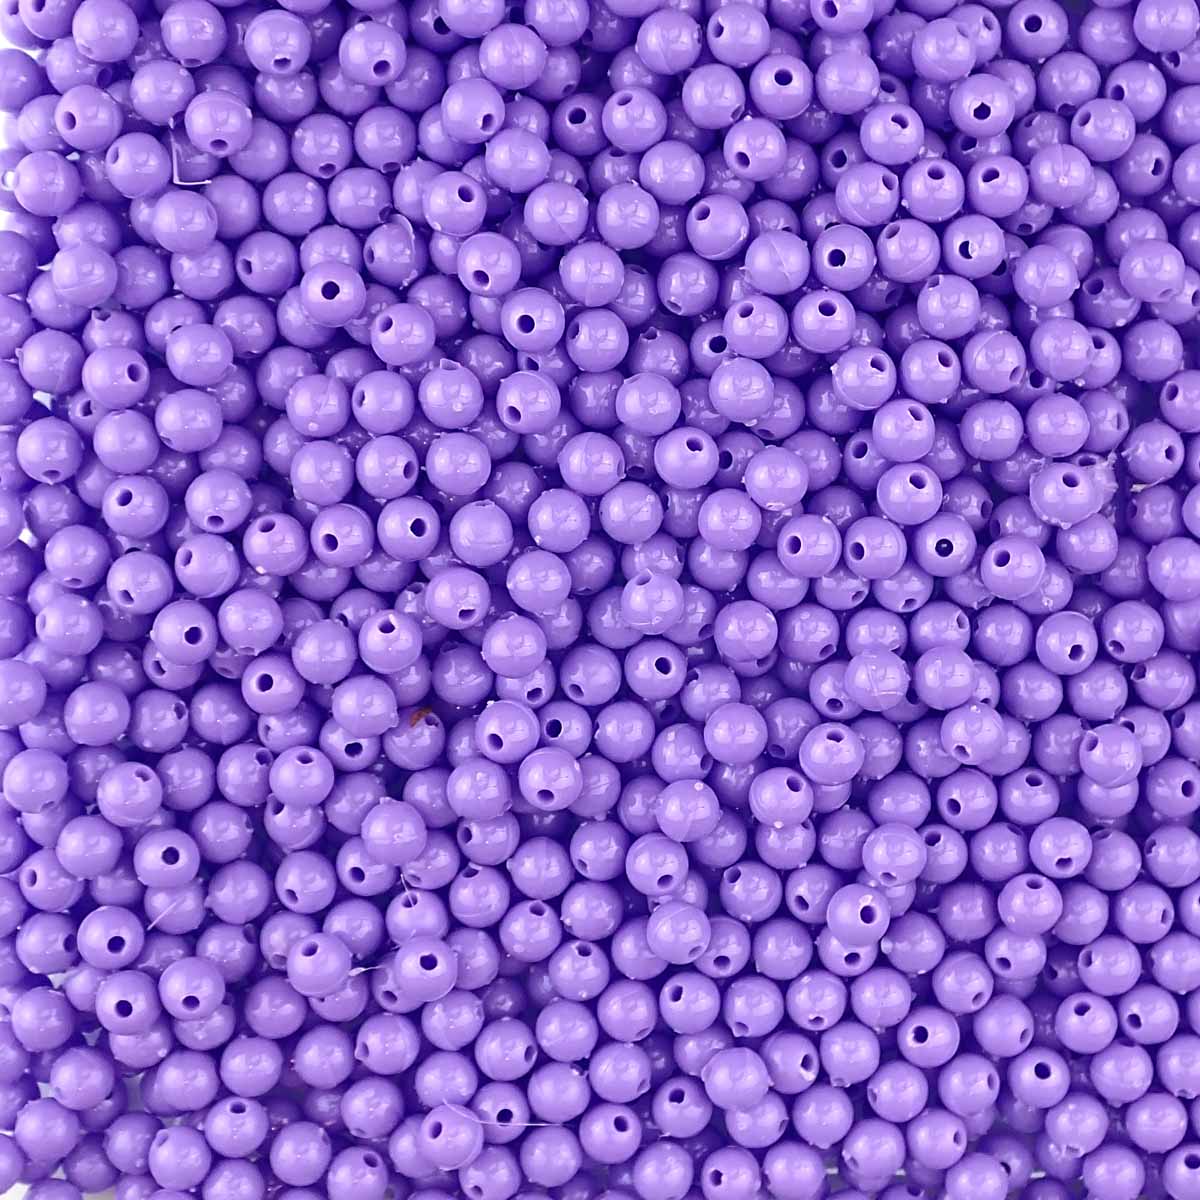 Lilac Plastic 6mm Round Beads, 500 beads